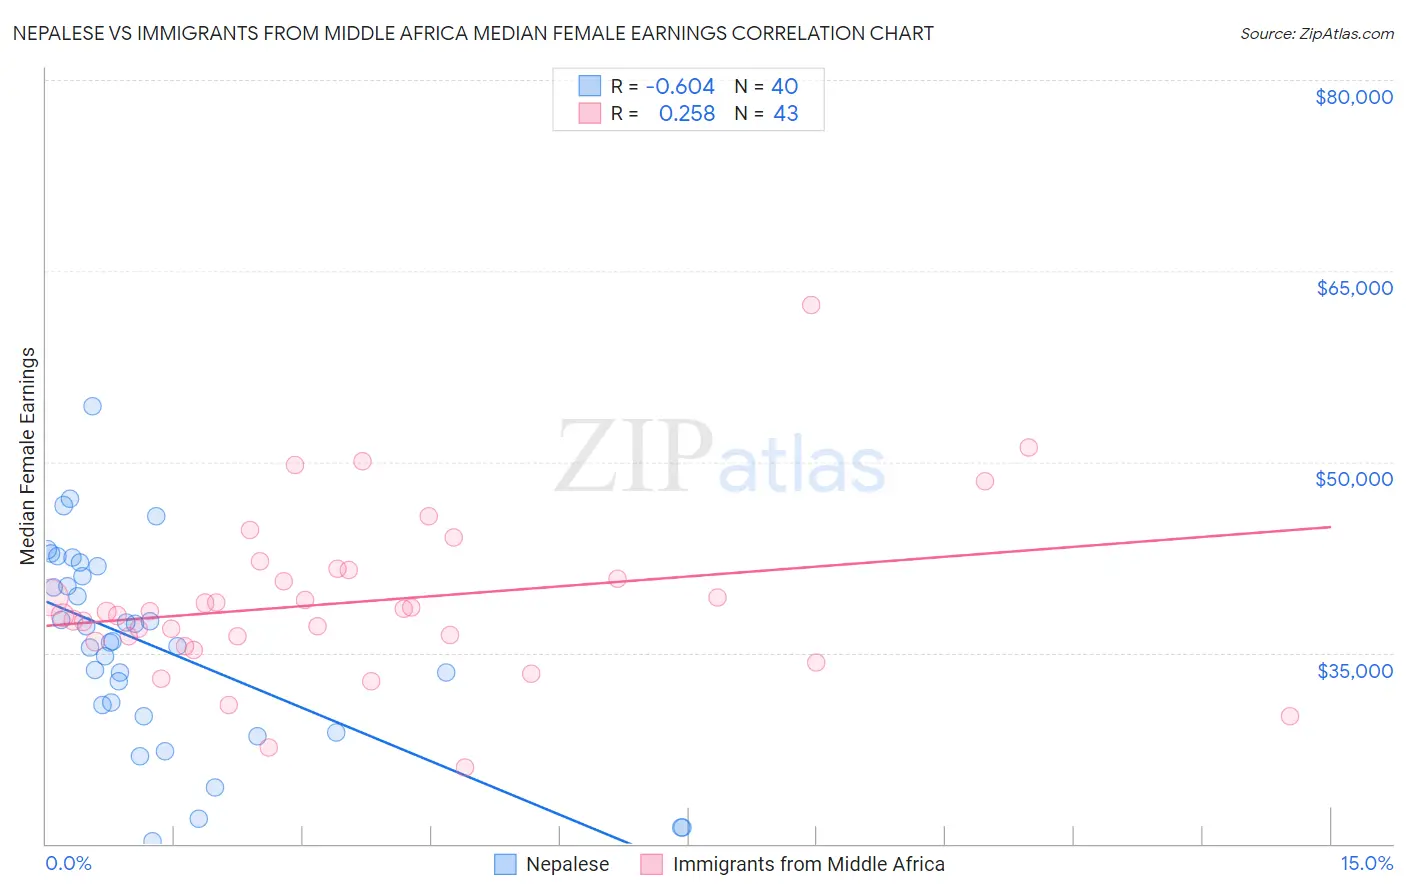 Nepalese vs Immigrants from Middle Africa Median Female Earnings